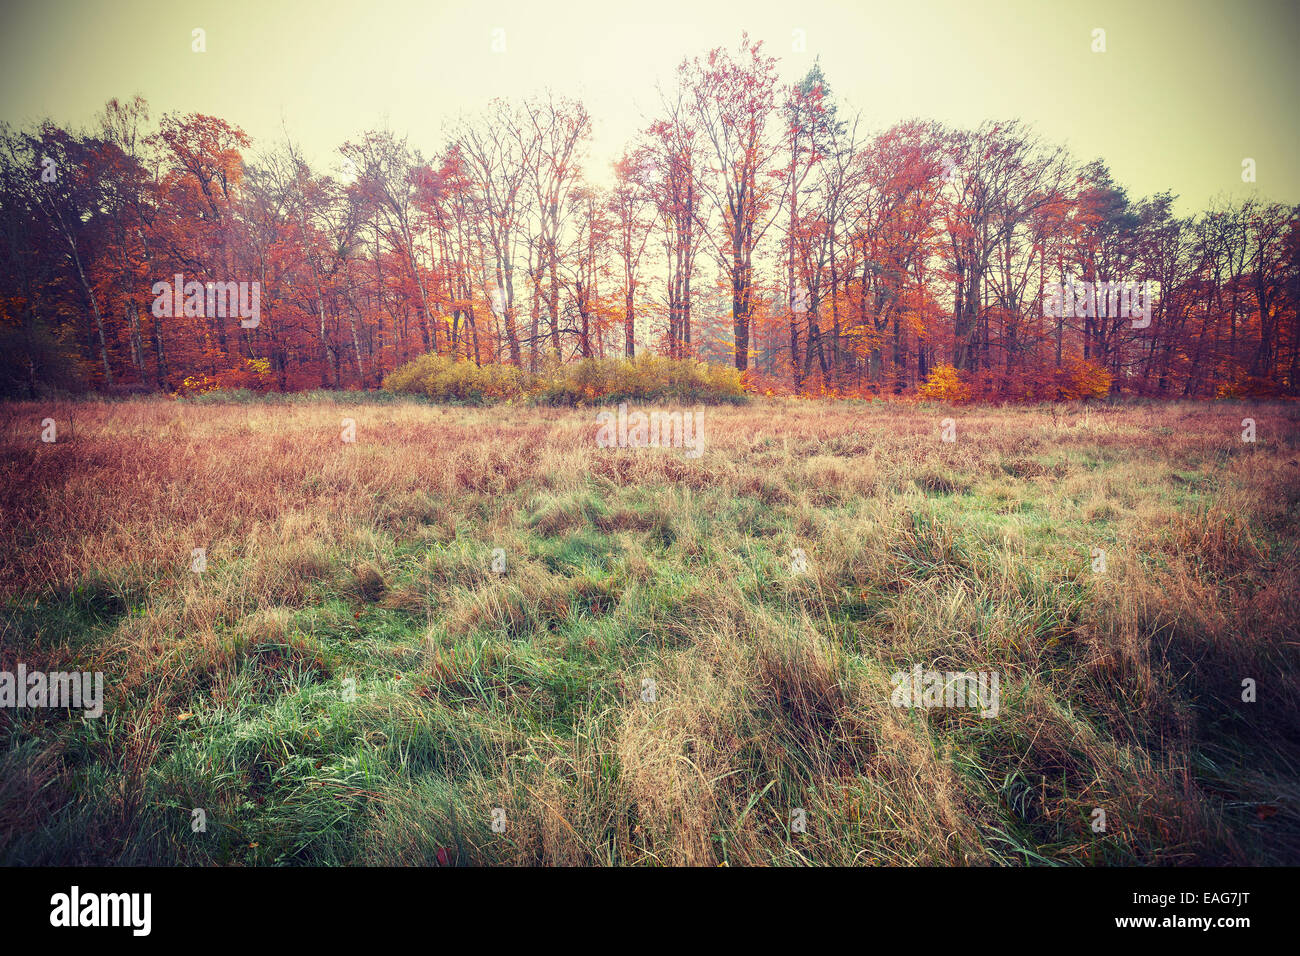 Vintage filtered photo of an autumn field. Stock Photo